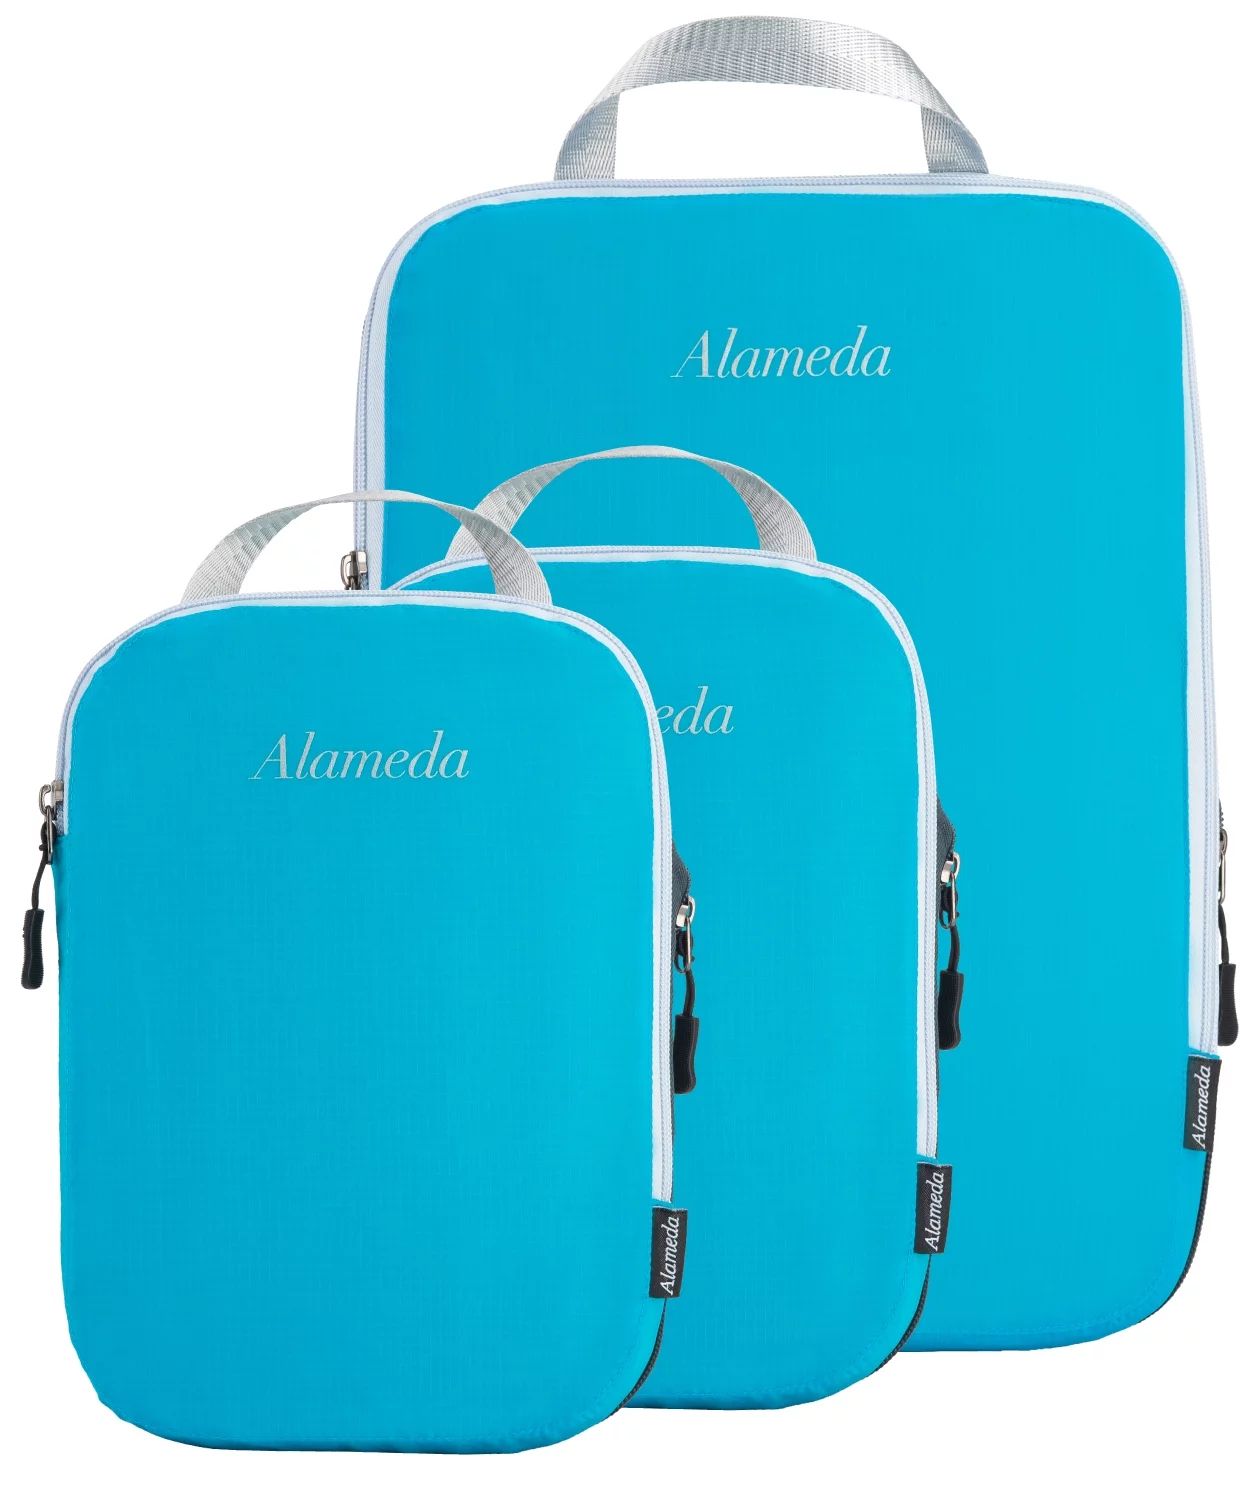 Alameda Compression Packing Cubes for Luggage,Travel Compression Bags | Walmart (US)